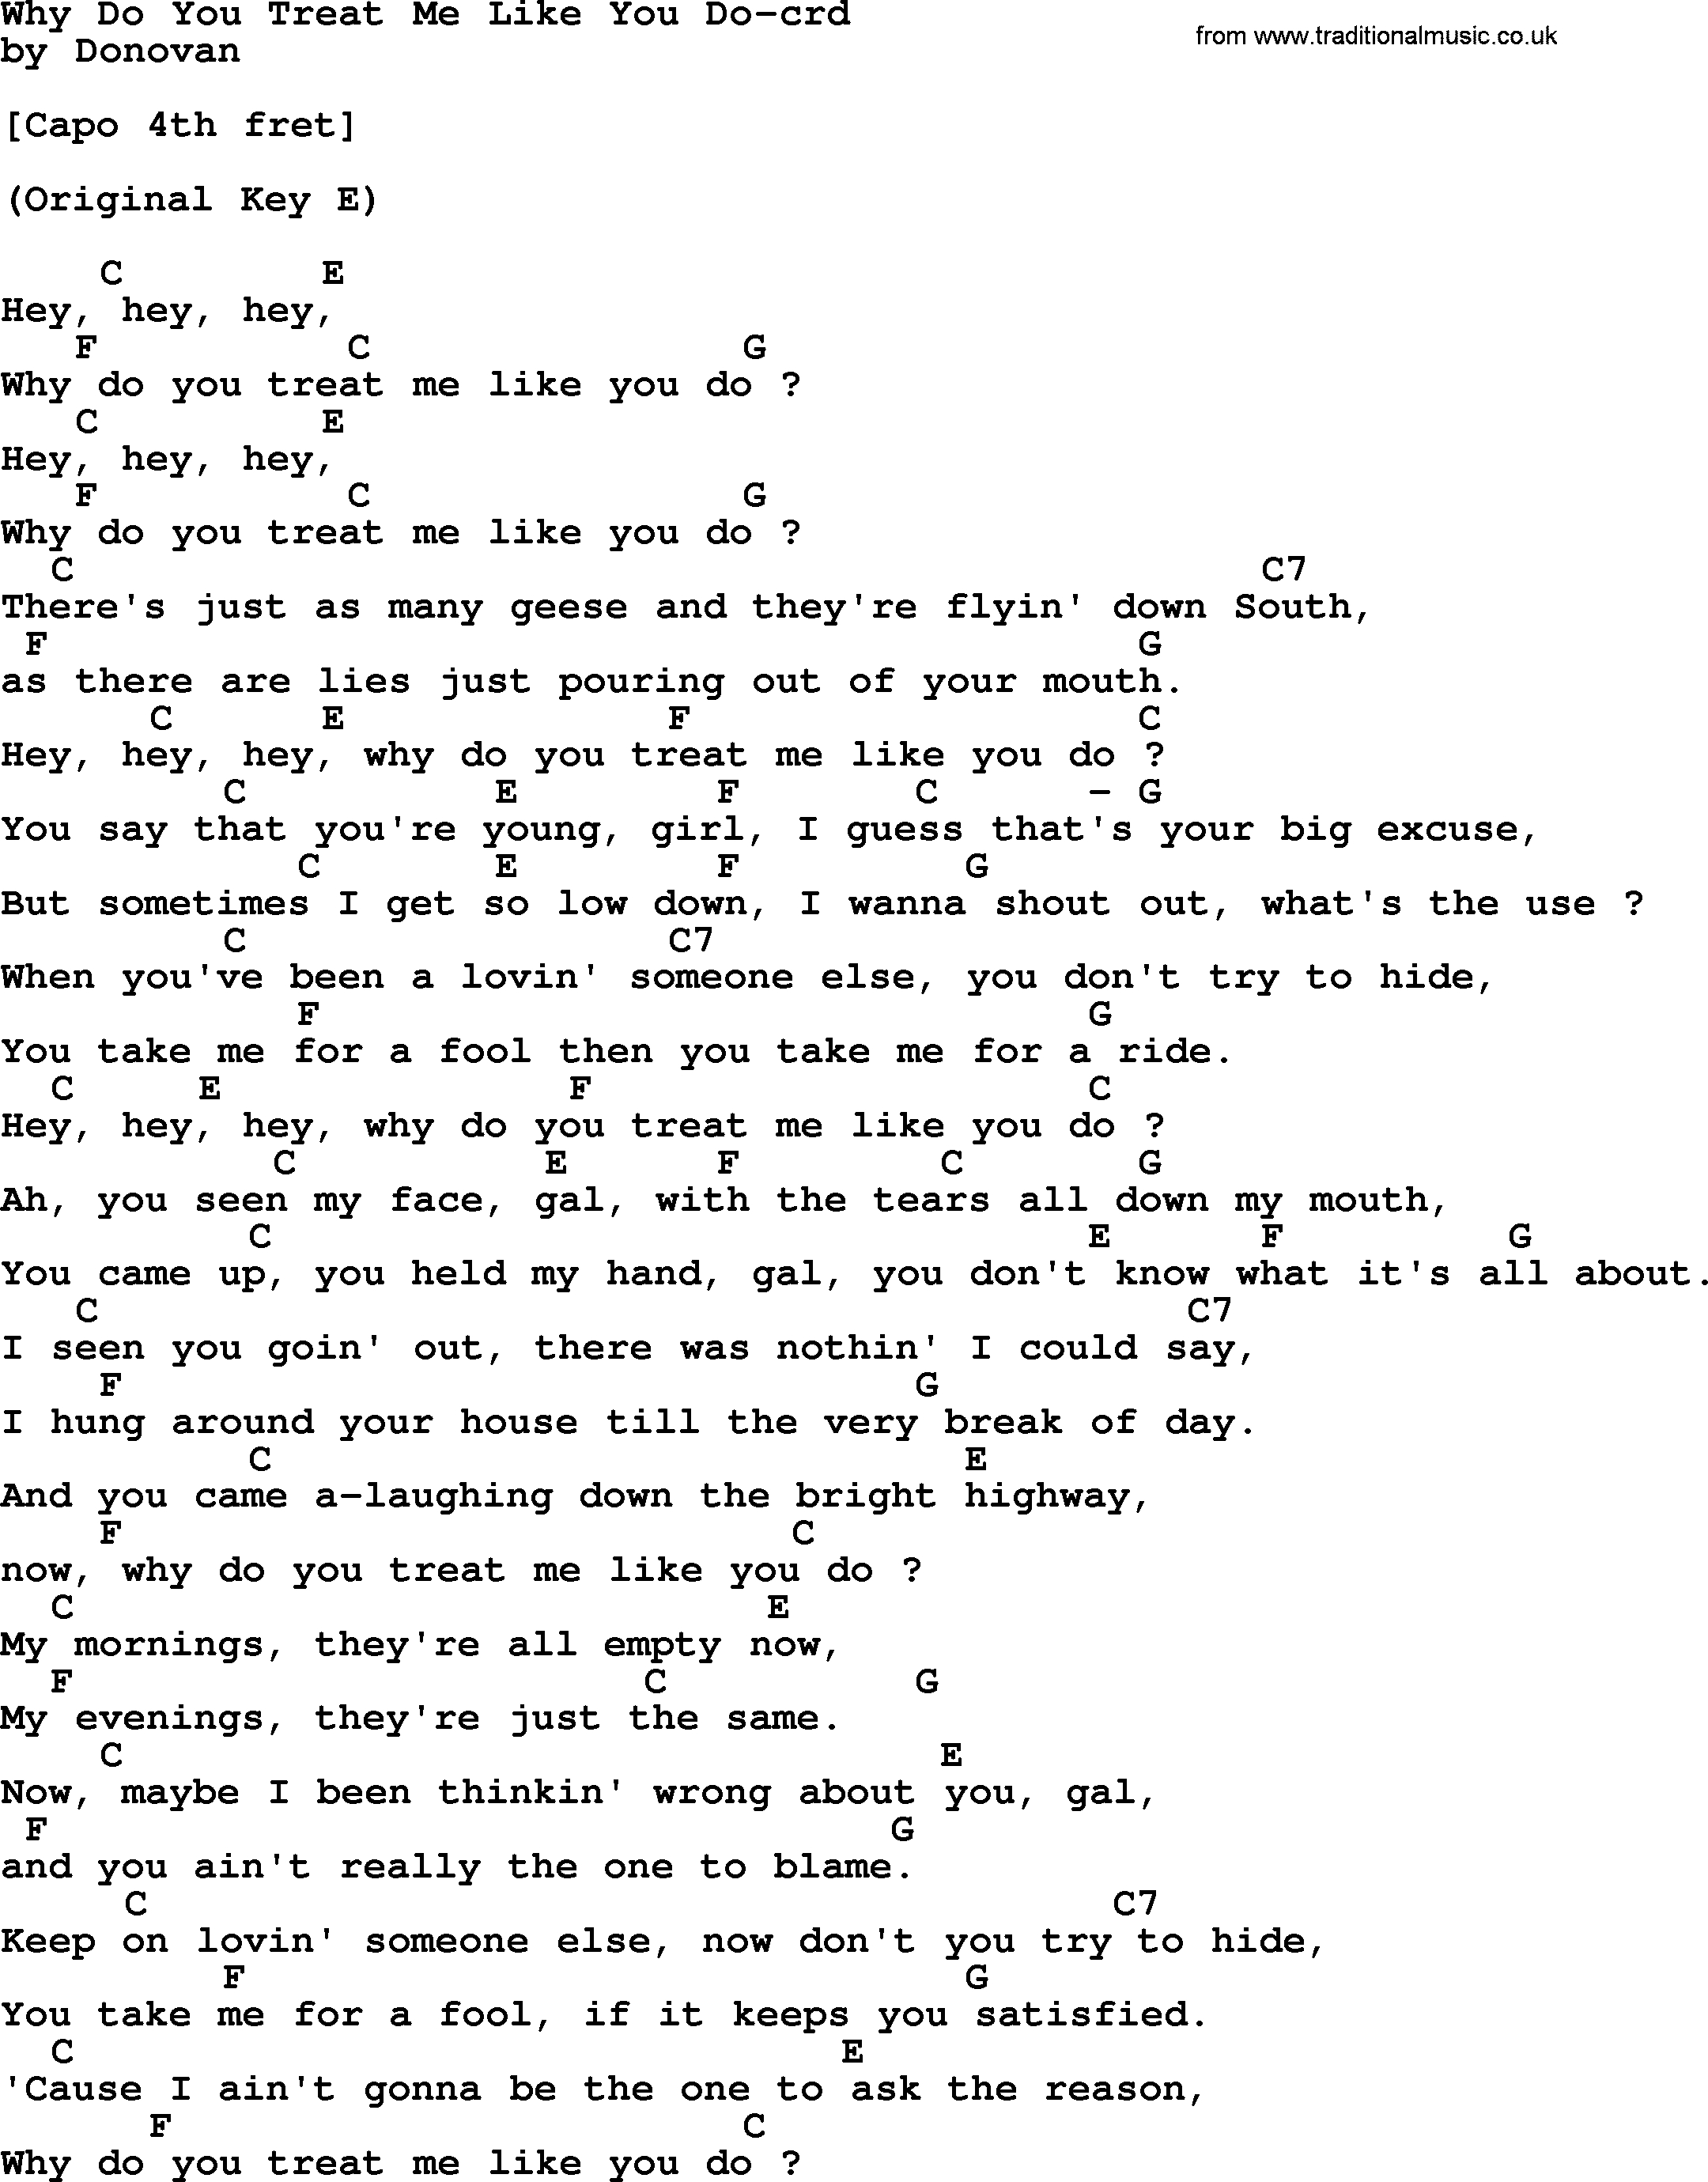 Love Me Like You Do Chords Donovan Leitch Song Why Do You Treat Me Like You Do Lyrics And Chords